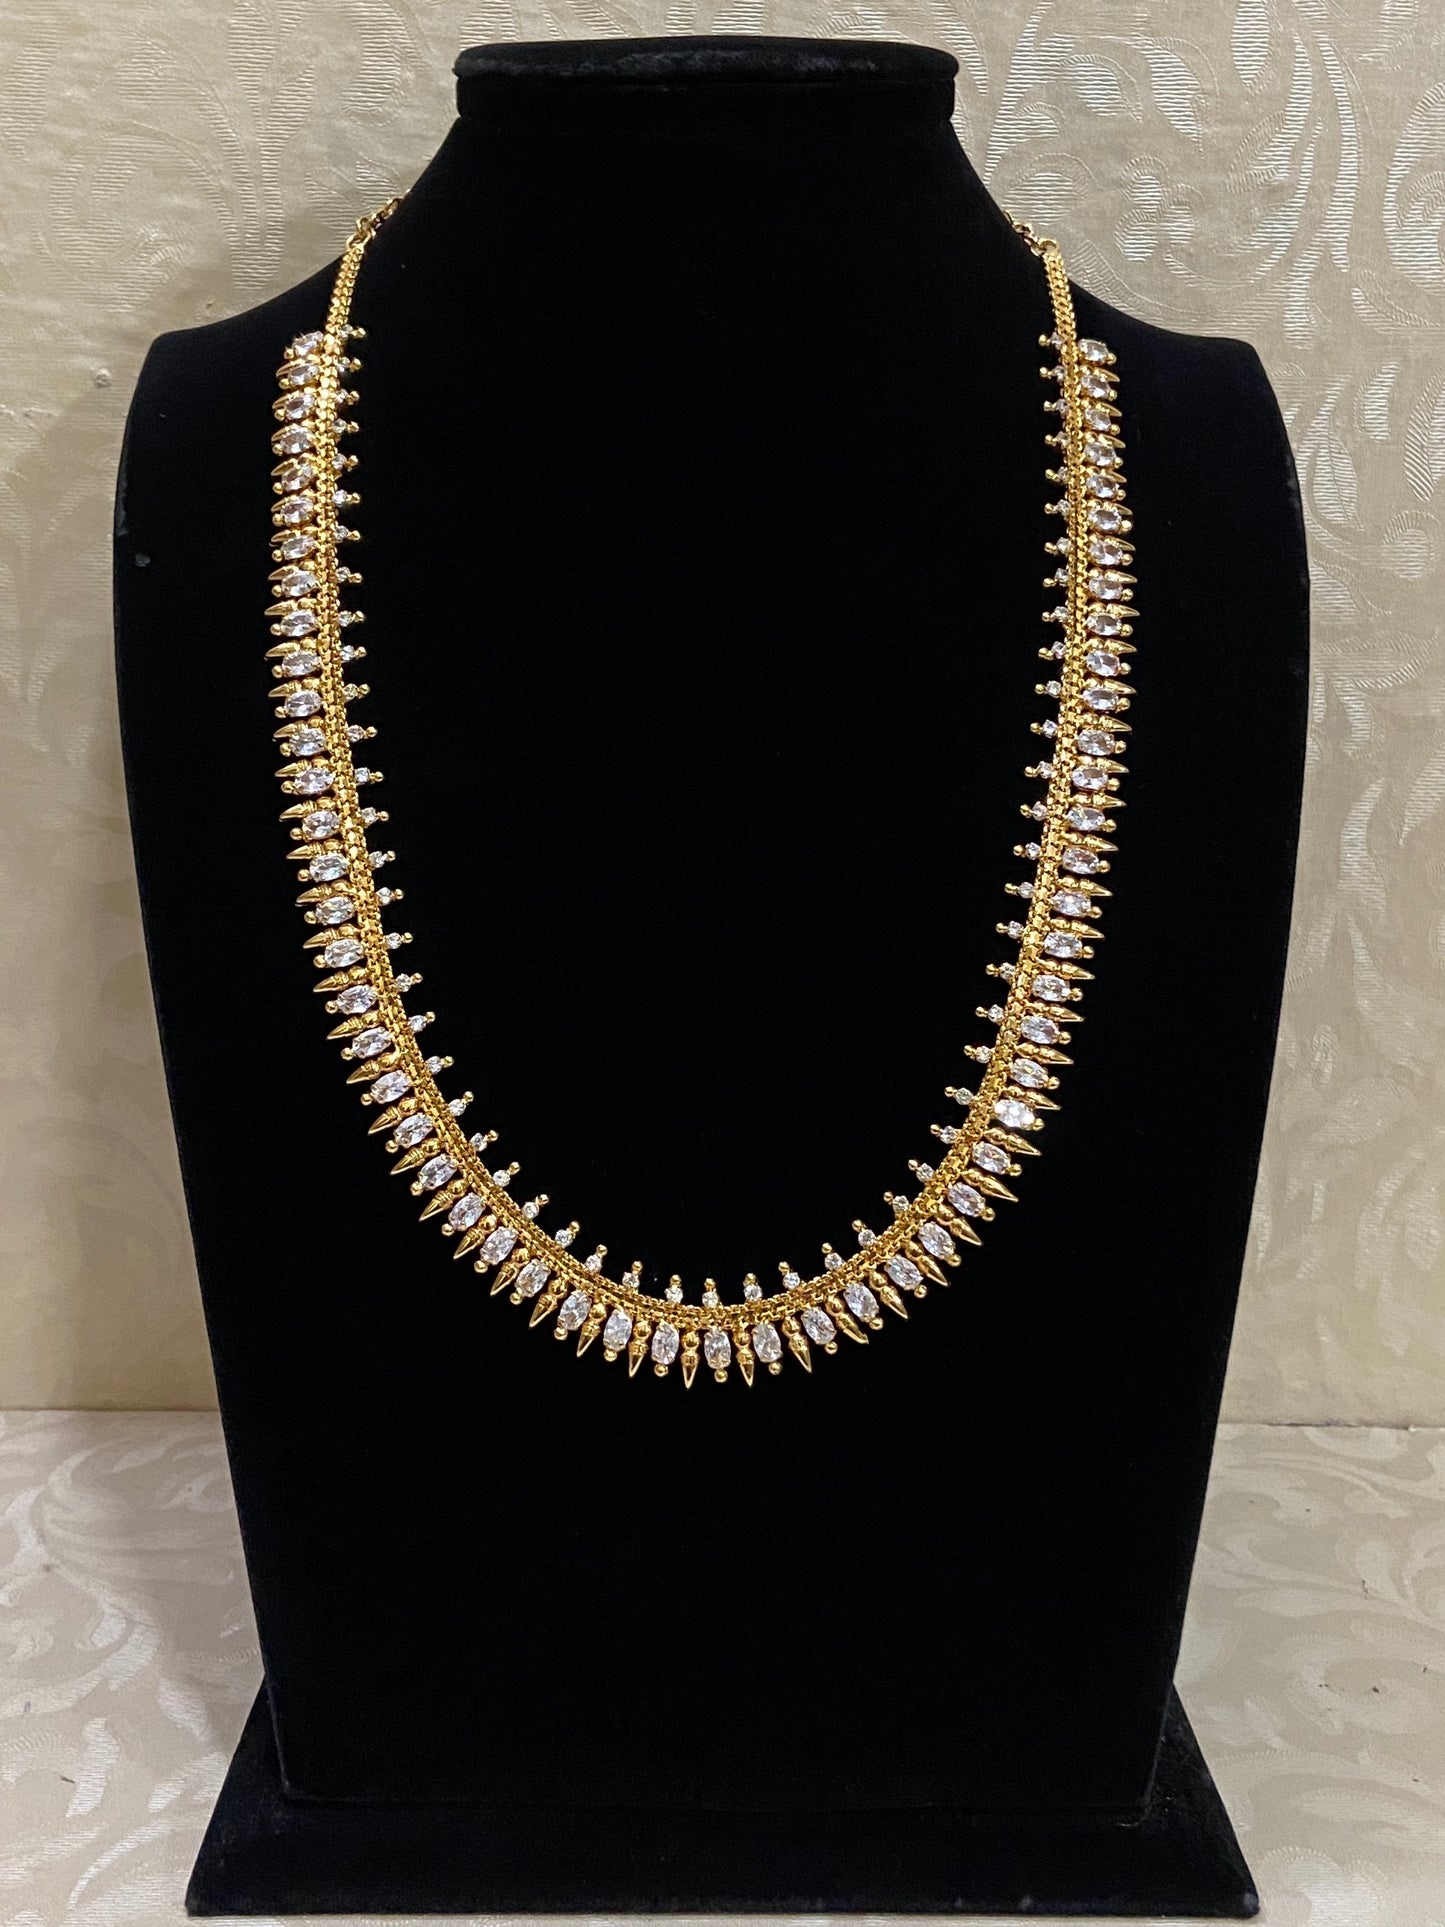 Long AD necklace | Indian jewelry